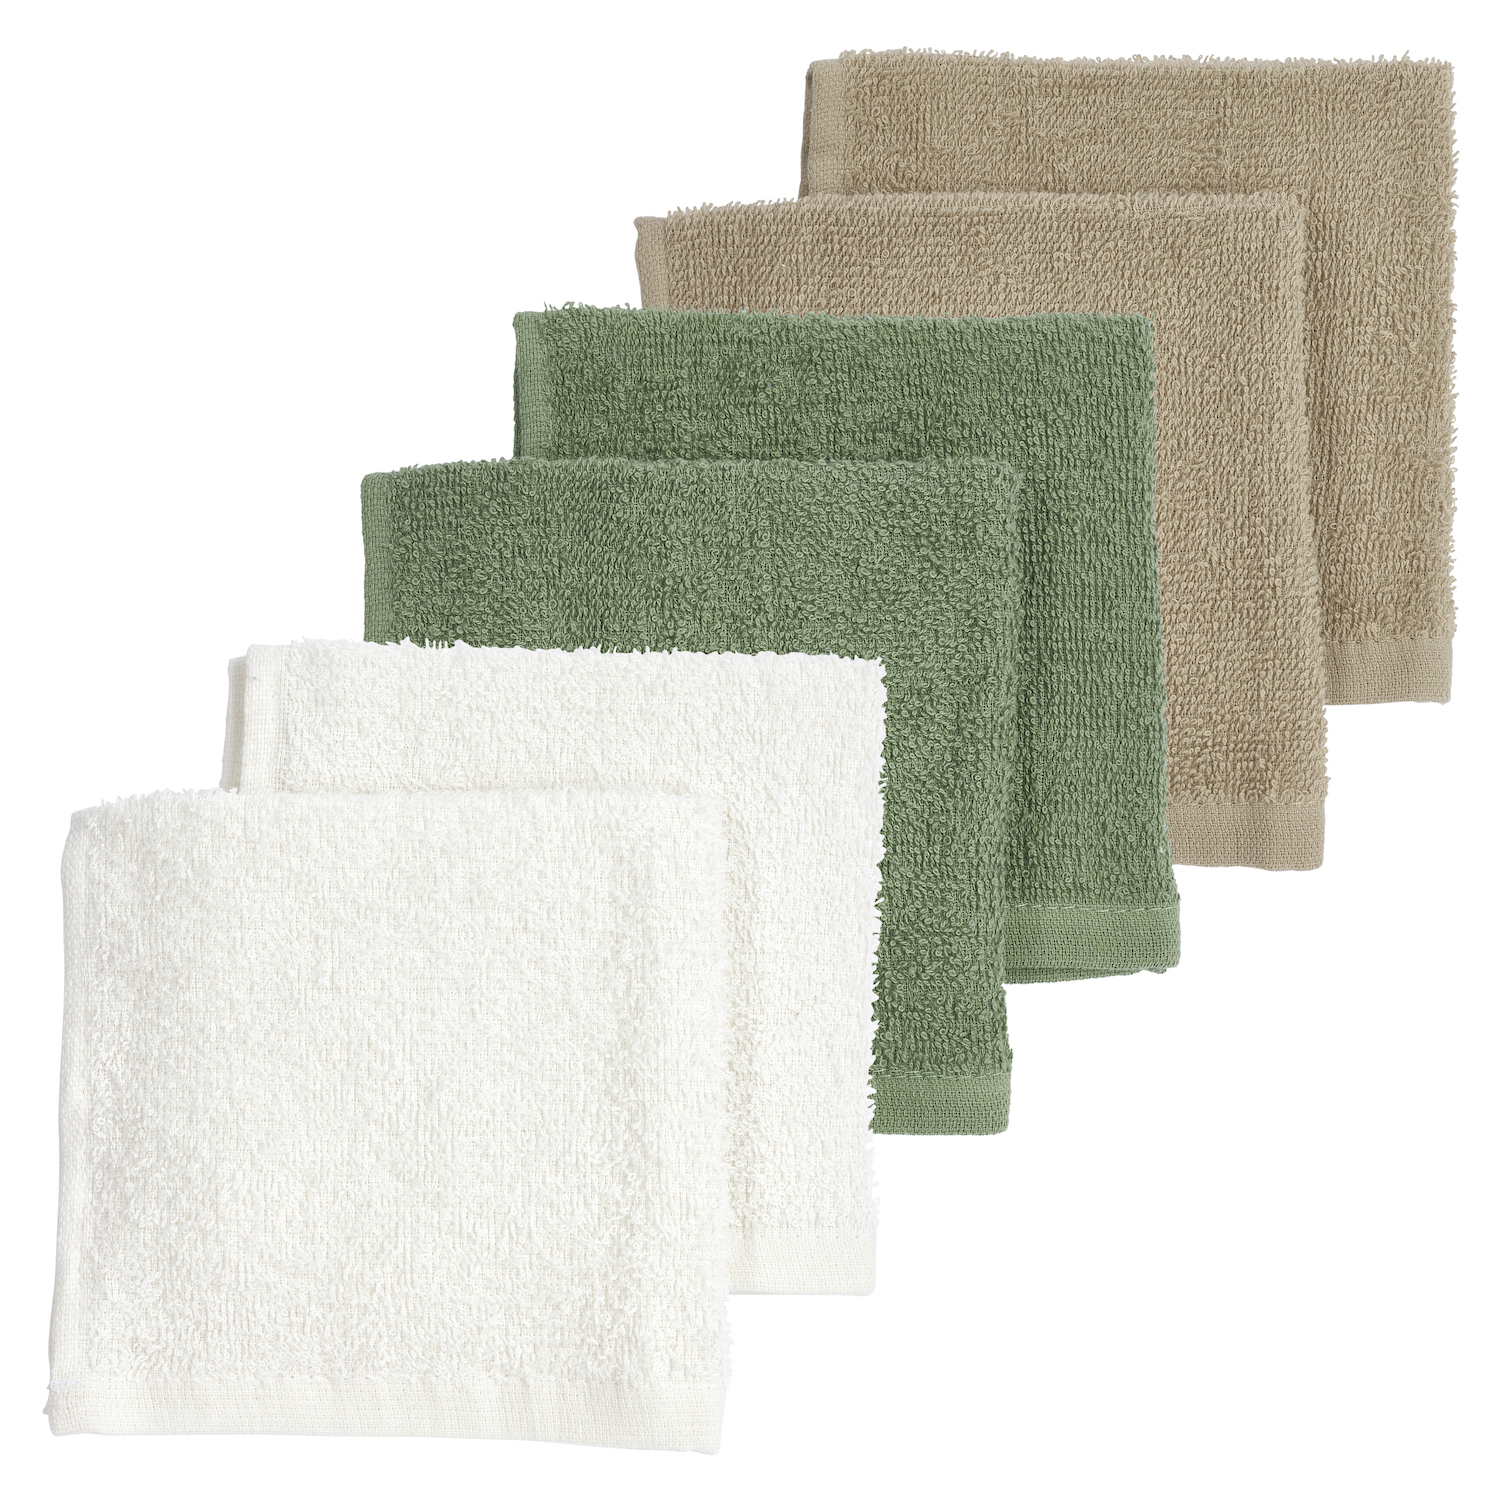 Basic Terry Face Cloths 6-pack  - Offwhite/Forest Green/Taupe - 30x30cm